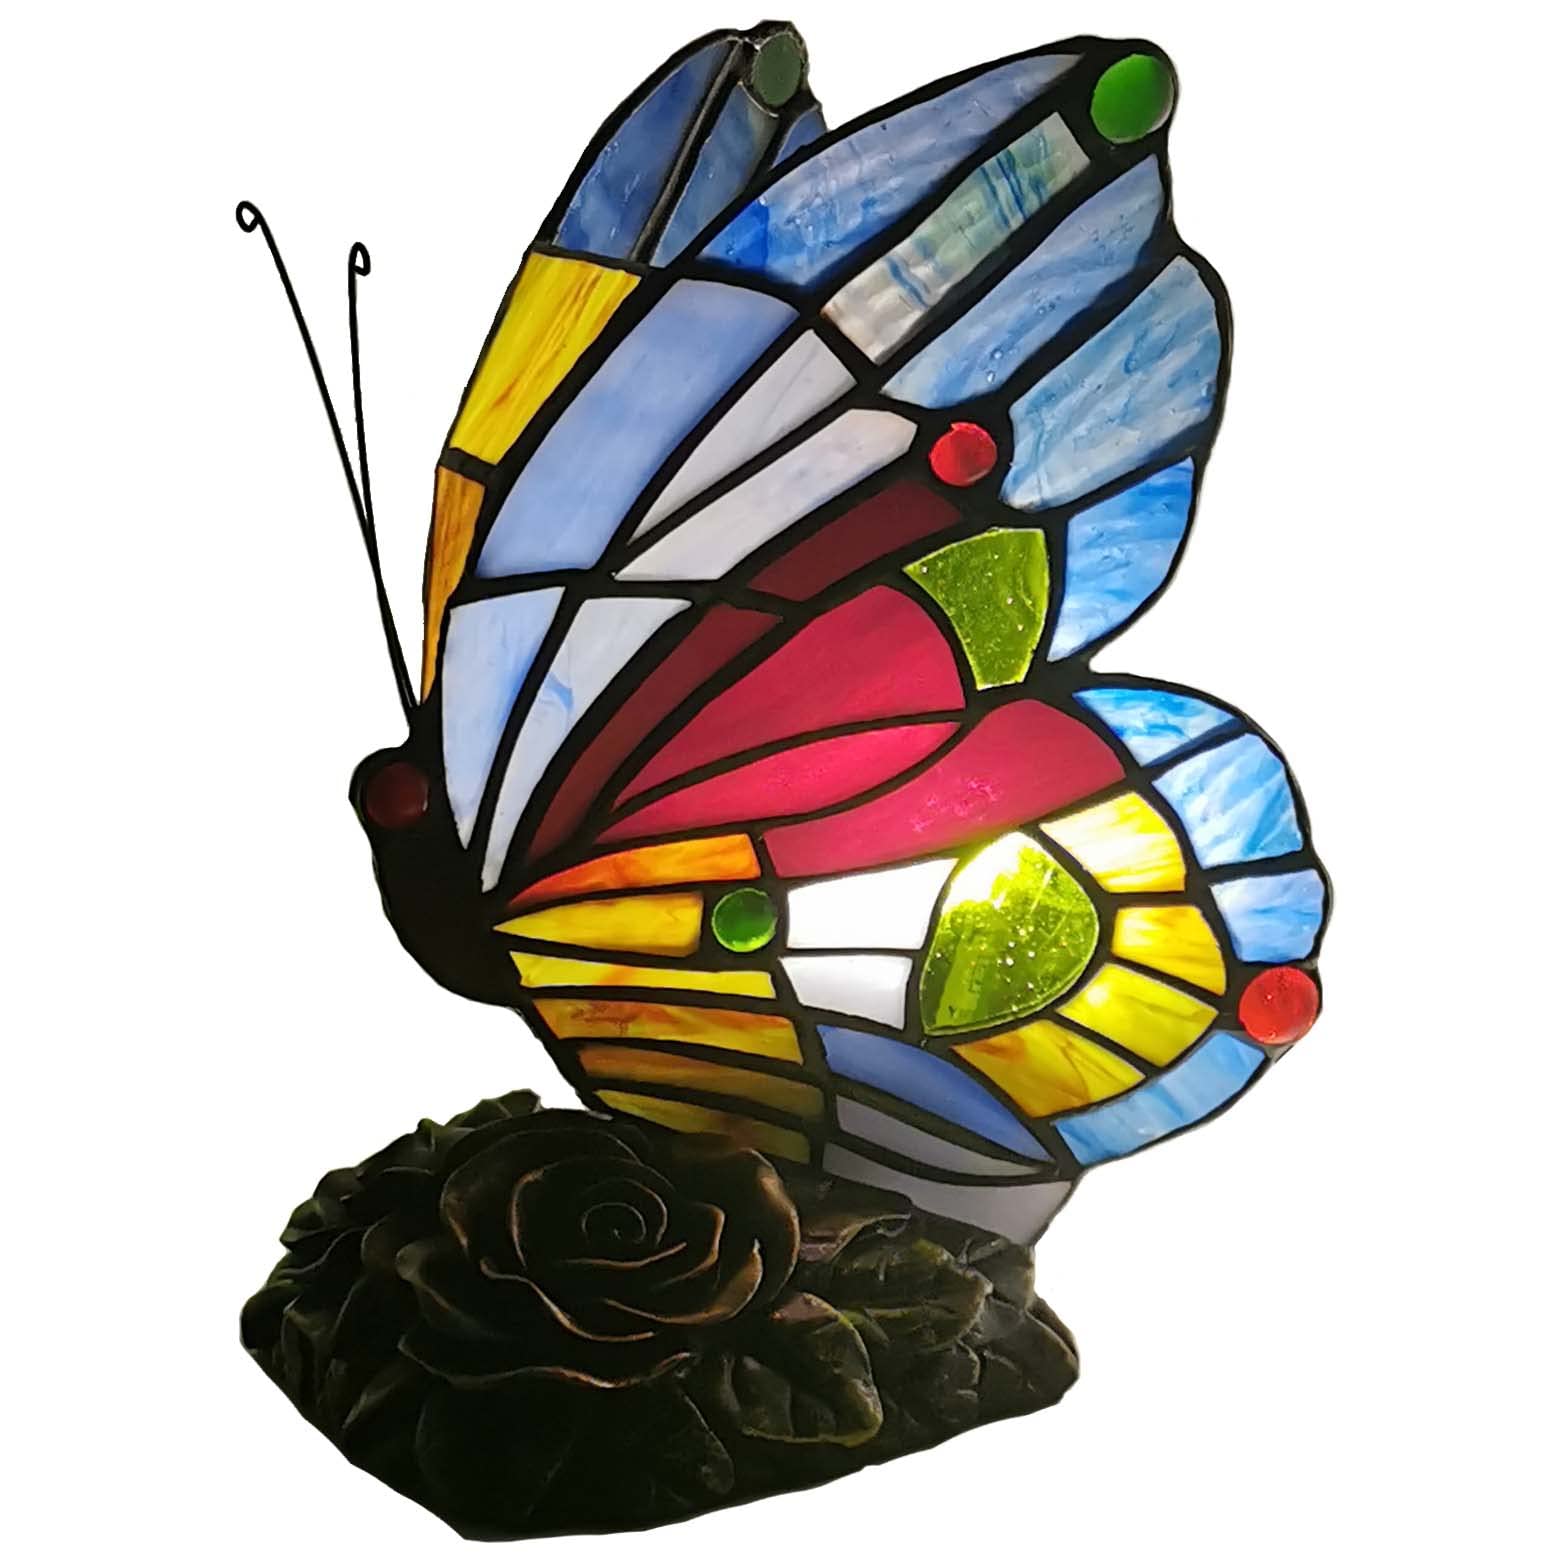 Bieye L10042 Butterfly Tiffany Style Stained Glass Accent Table Lamp Night Light for Bedside Bedroom Living Room (Multi-Colored E)